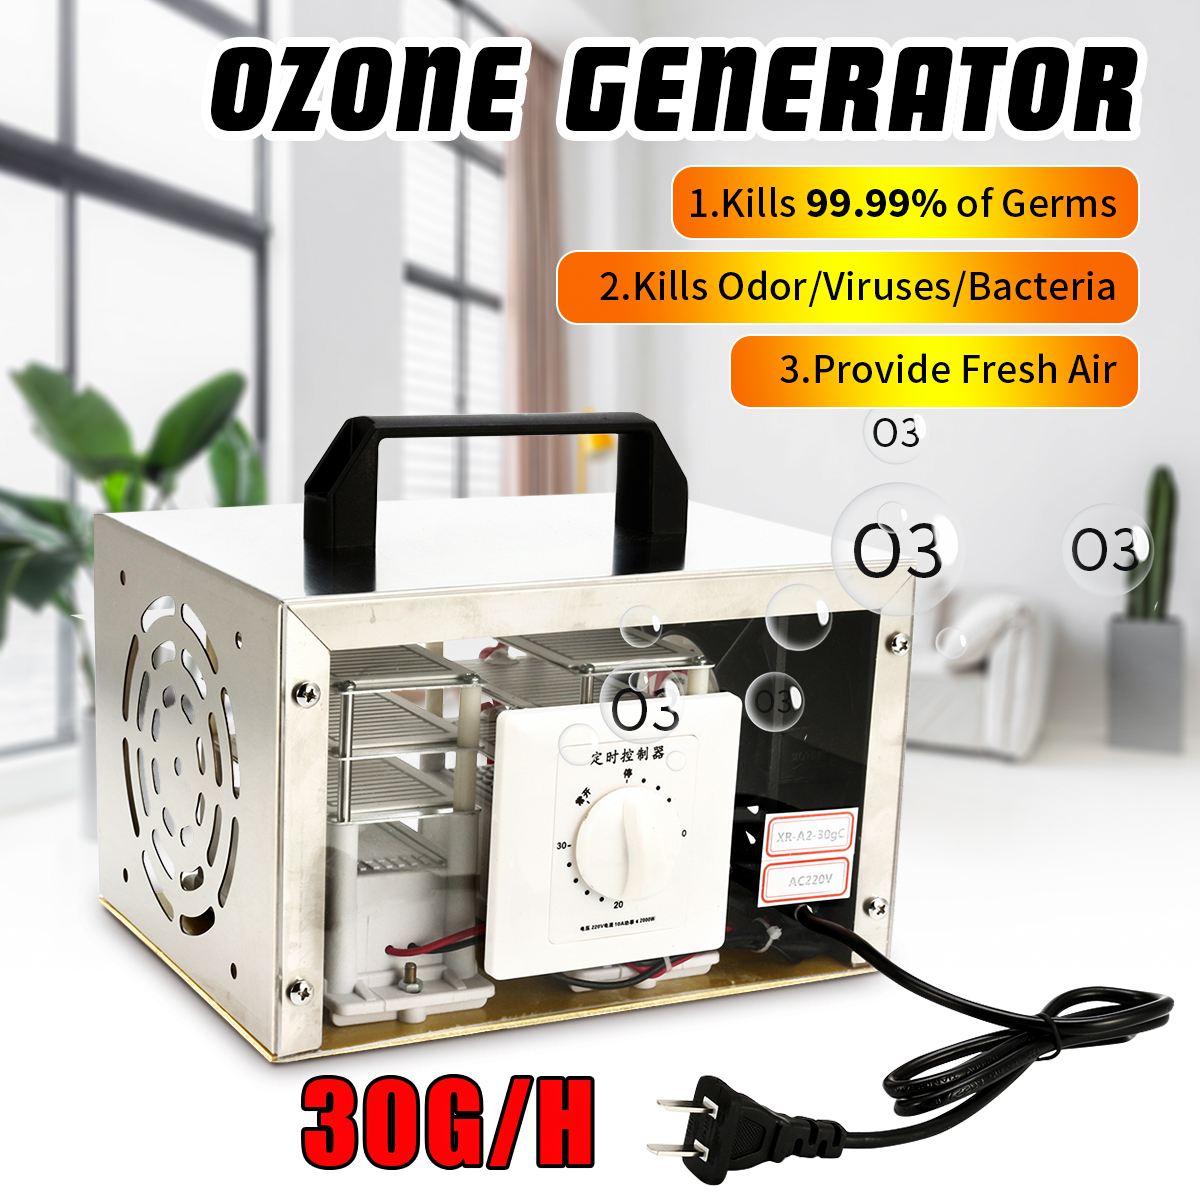 30gh-50gh-220V-Air-Ozone-Generator-Air-Purifier-Sterilizer-With-Timing-Switch-for-Home-Car-Office-Me-1290170-2